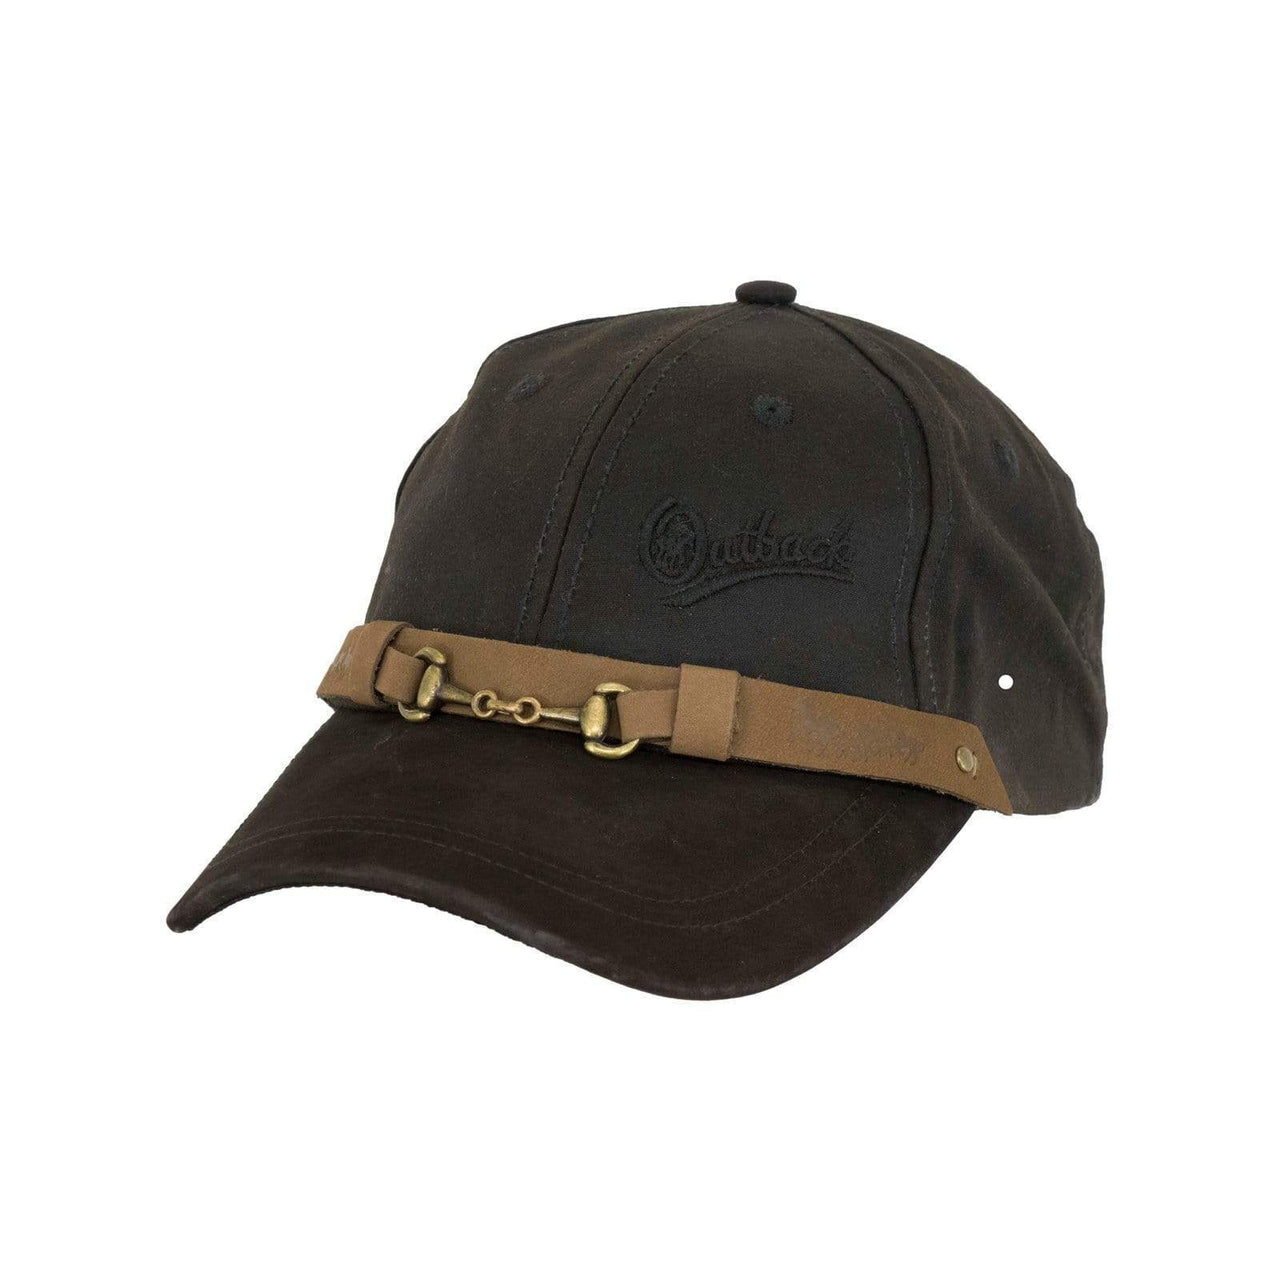 Outback Equestrian Cap One Size